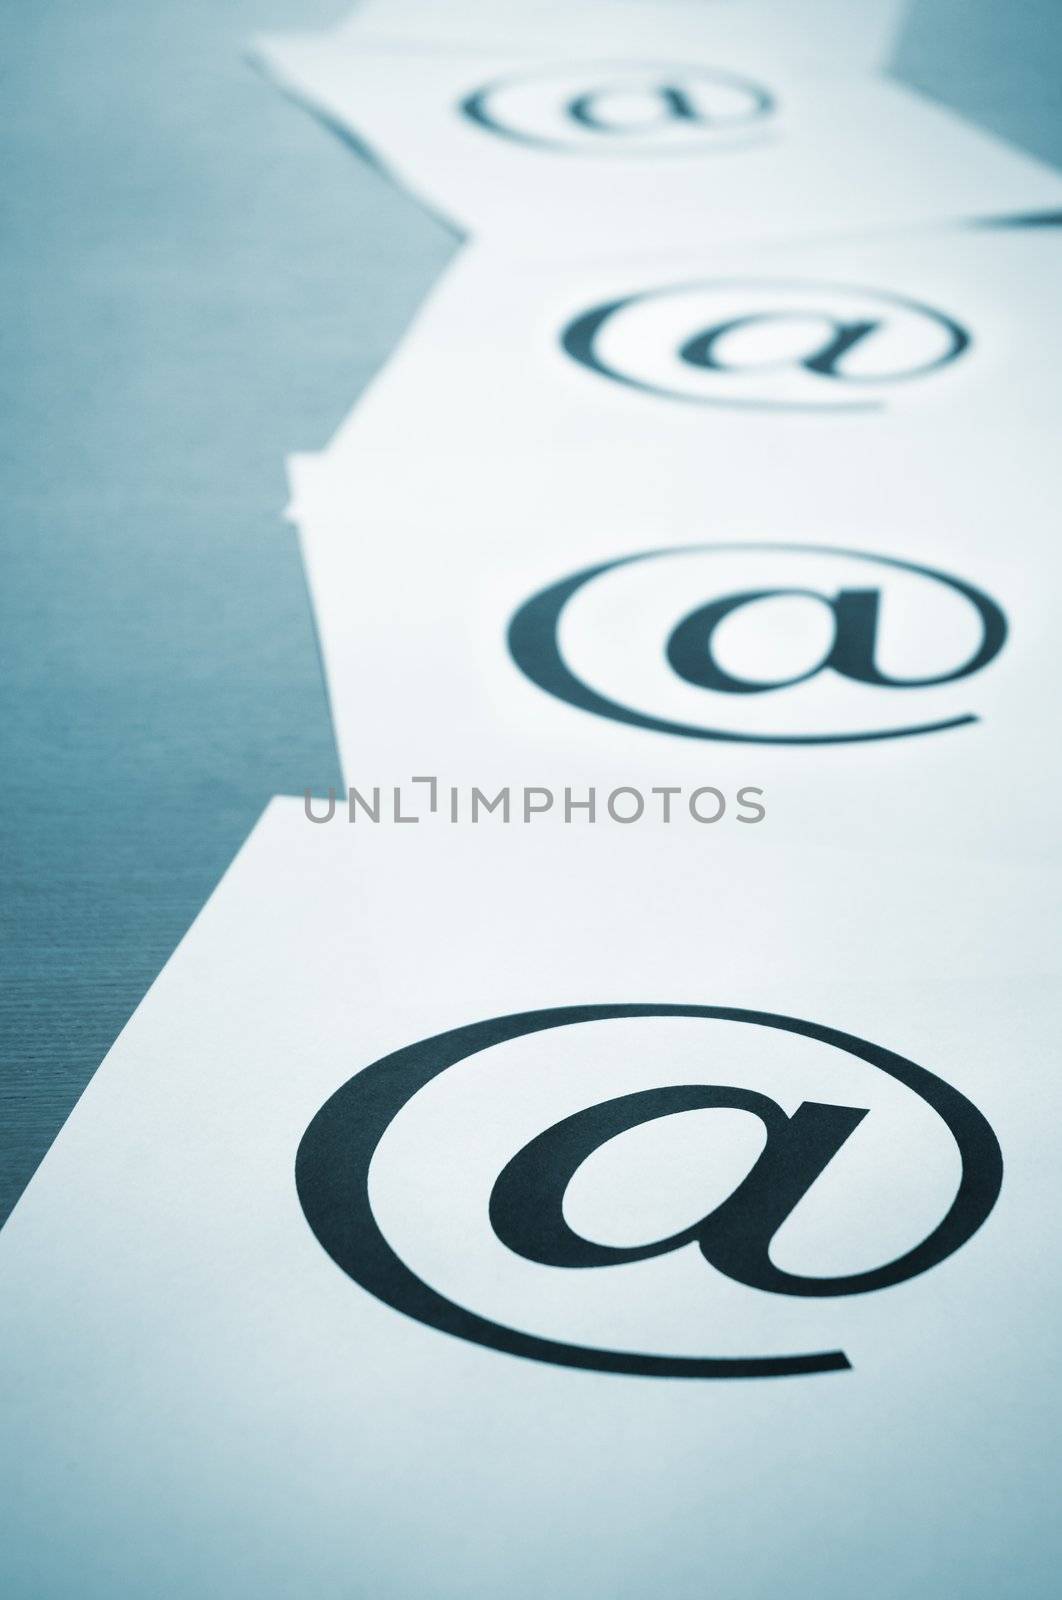 special blue tone with dark vignetting,focus point on the center of upper part of the nearest e-mail symbol